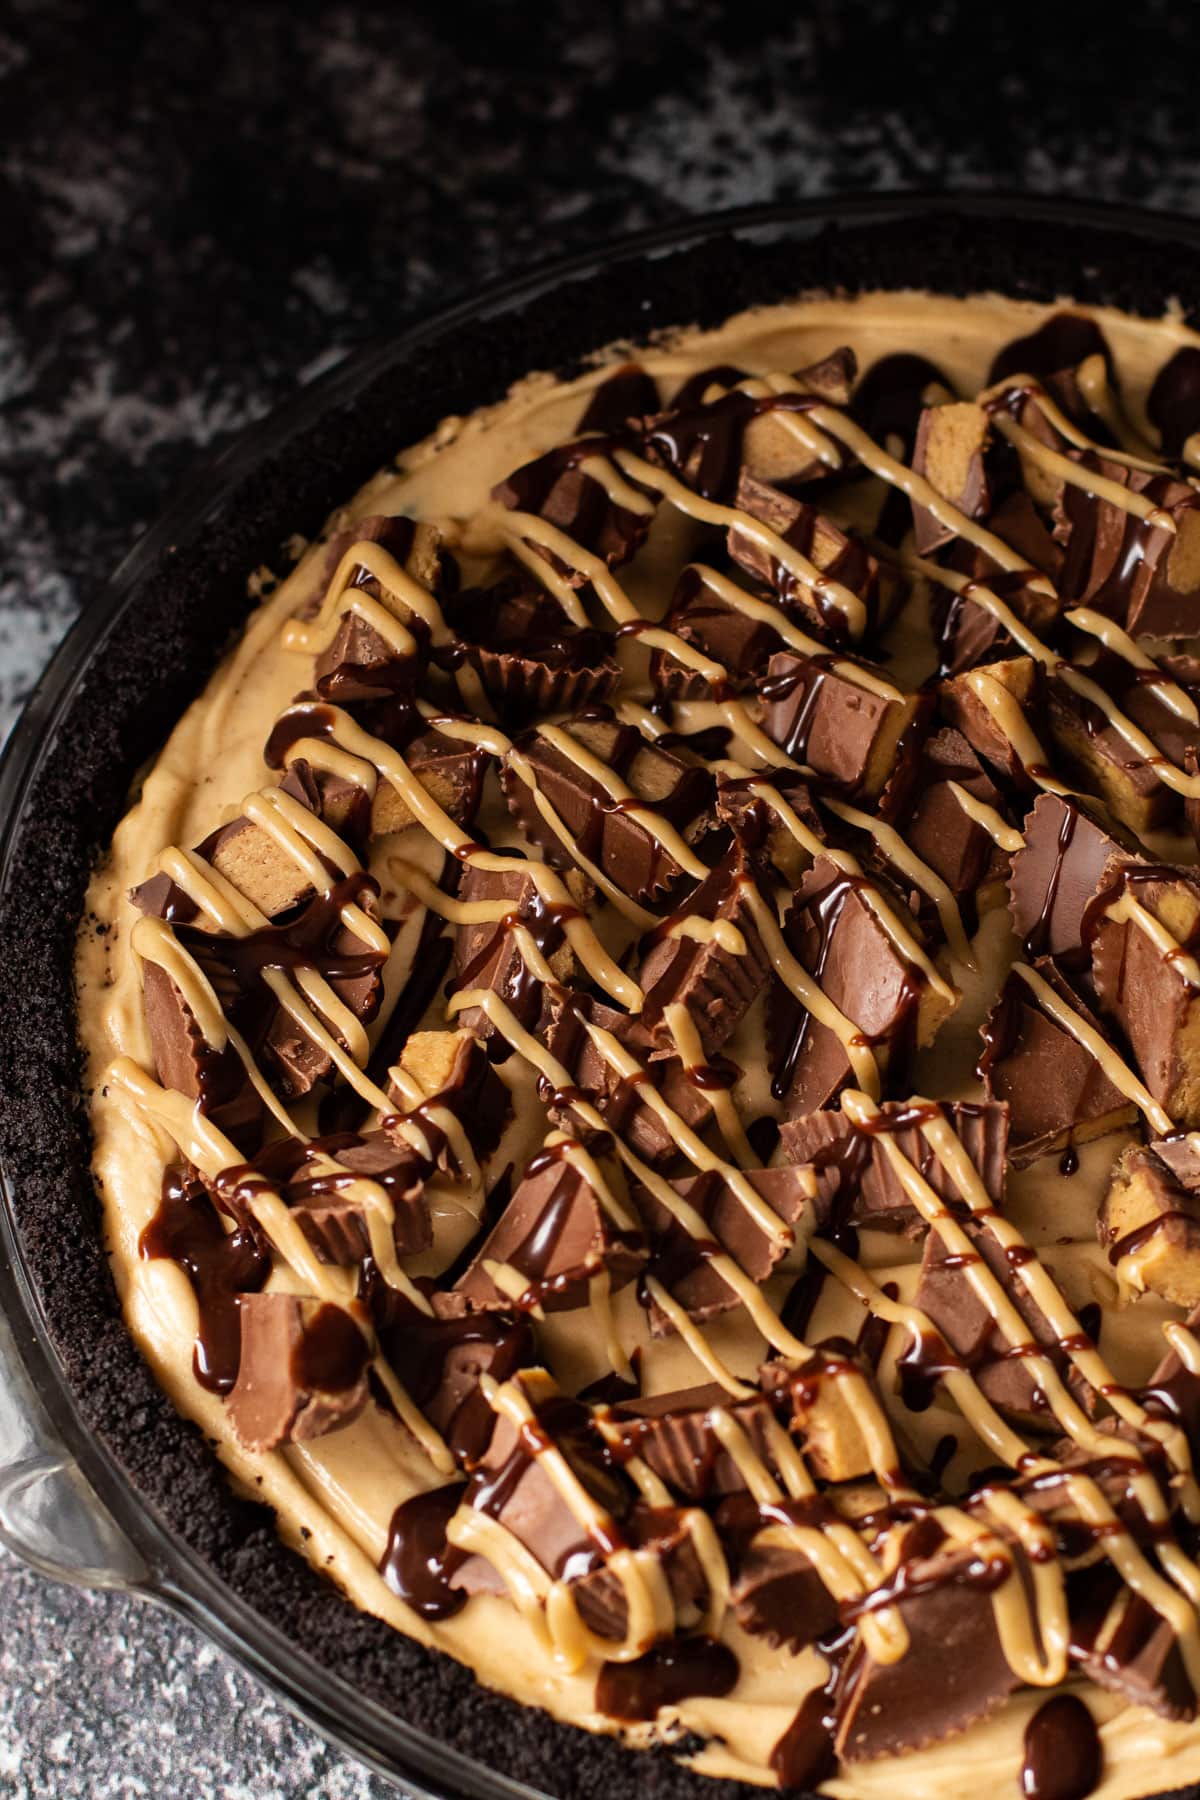 Peanutbutter pie with Reese's and peanut butter sauce.